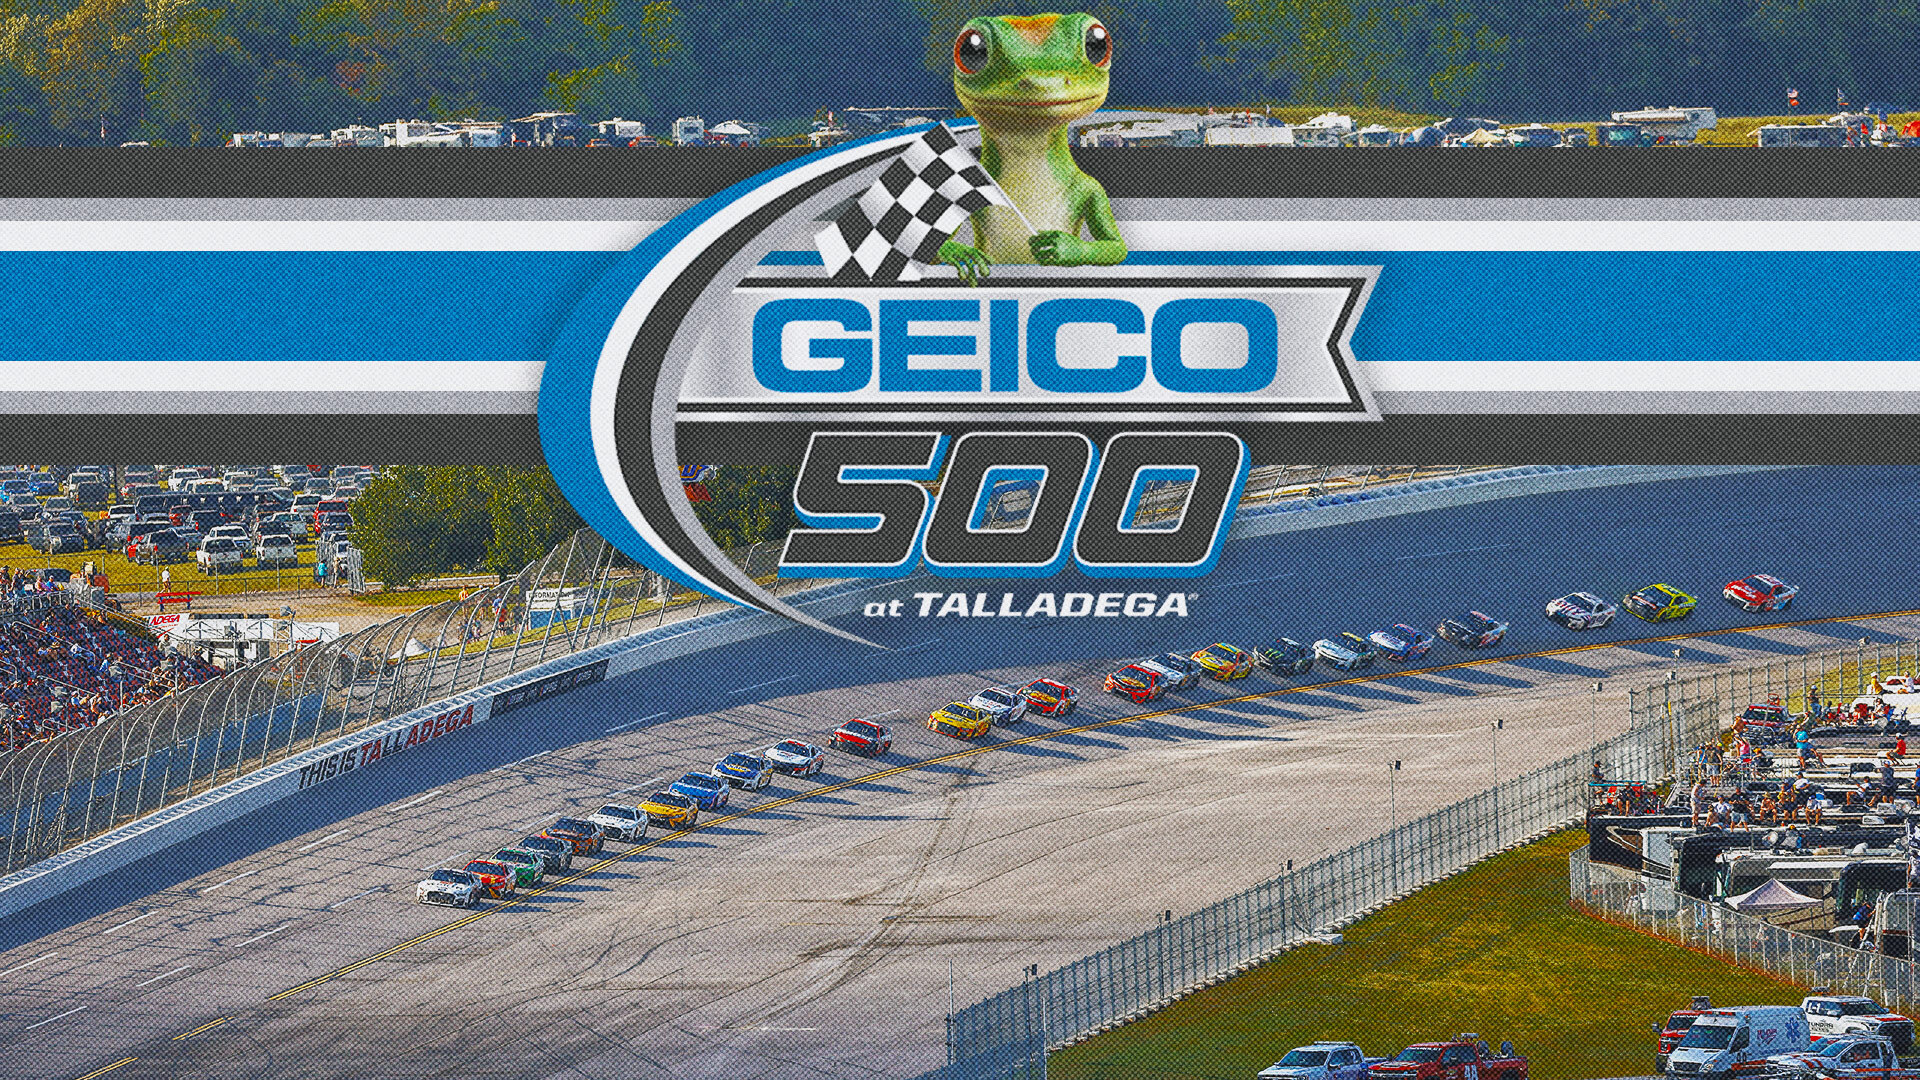 GEICO 500 live updates: Top moments from Talladega Superspeedway